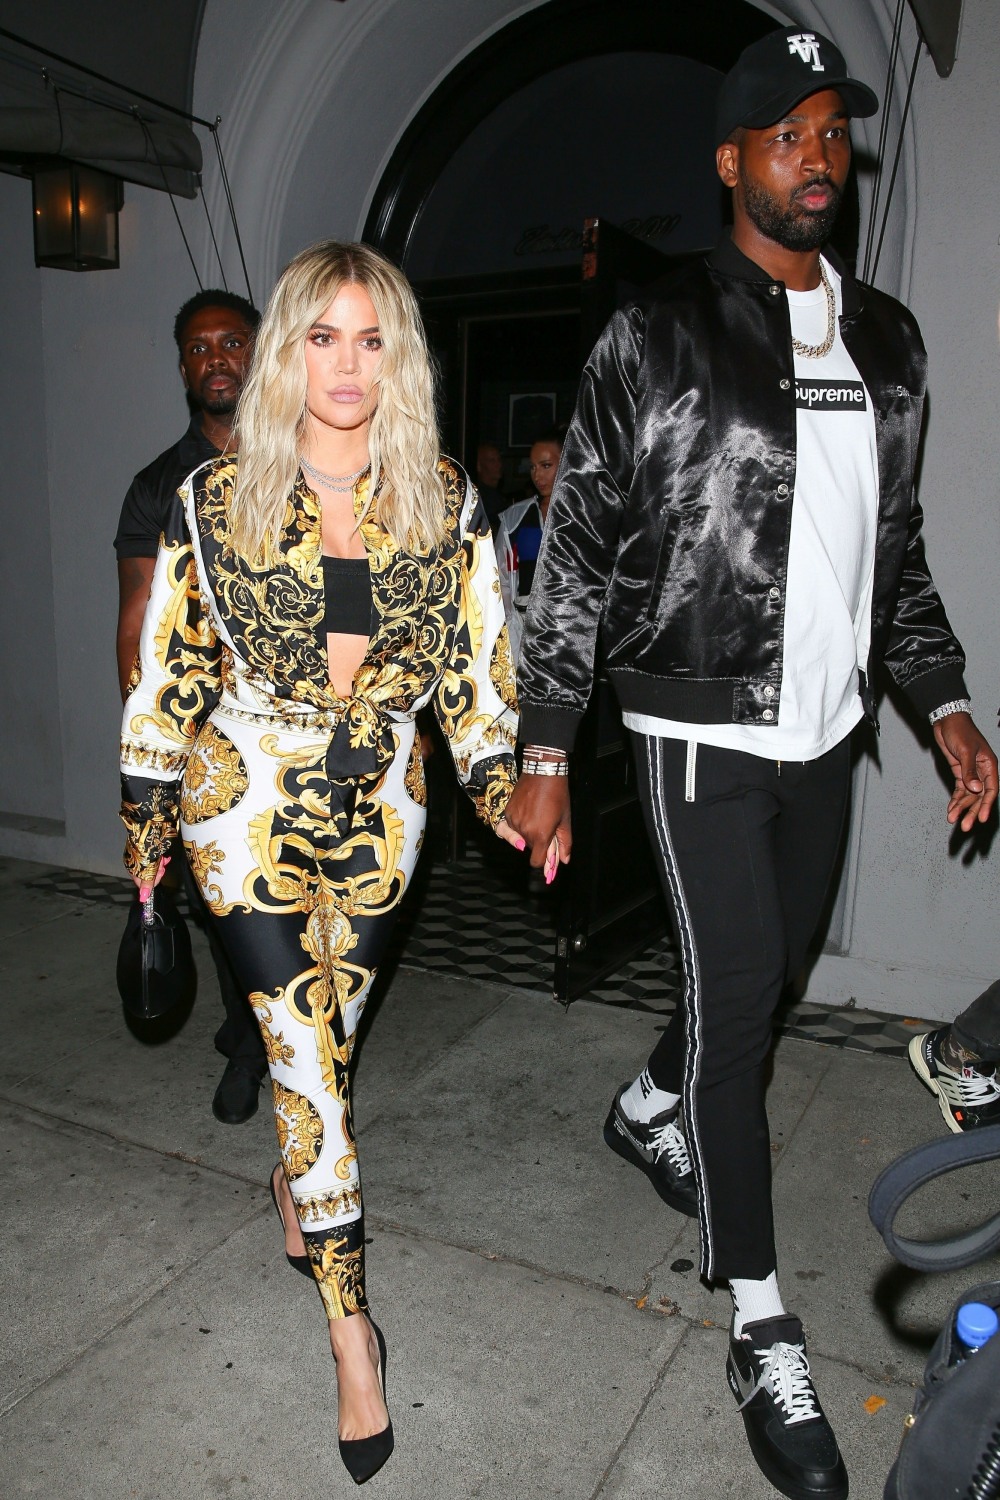 Khloe Kardashian and Tristan Thompson exit dinner after kicking off the weekend